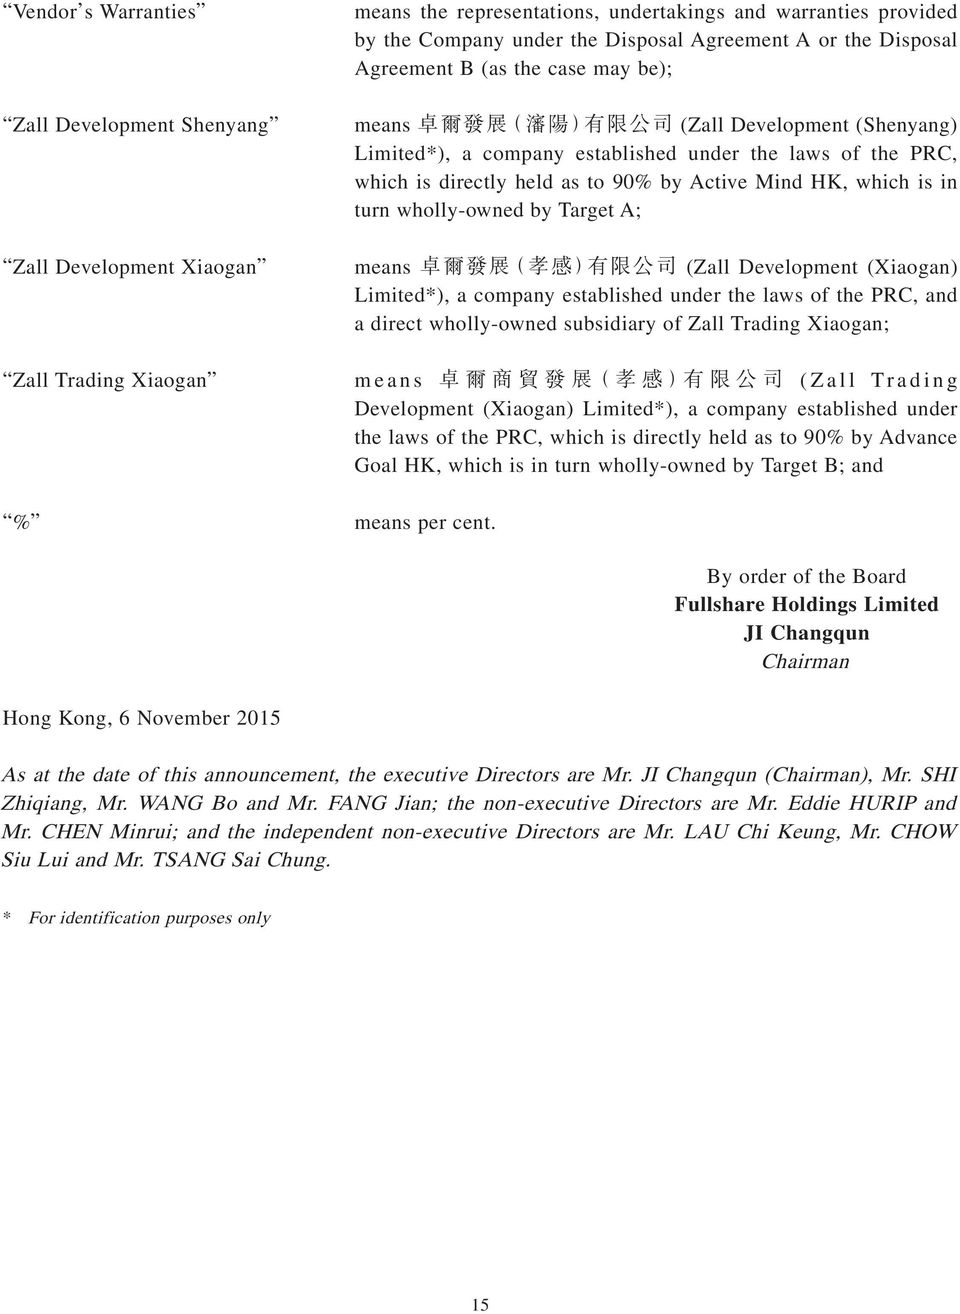 which is in turn wholly-owned by Target A; means (Zall Development (Xiaogan) Limited*), a company established under the laws of the PRC, and a direct wholly-owned subsidiary of Zall Trading Xiaogan;